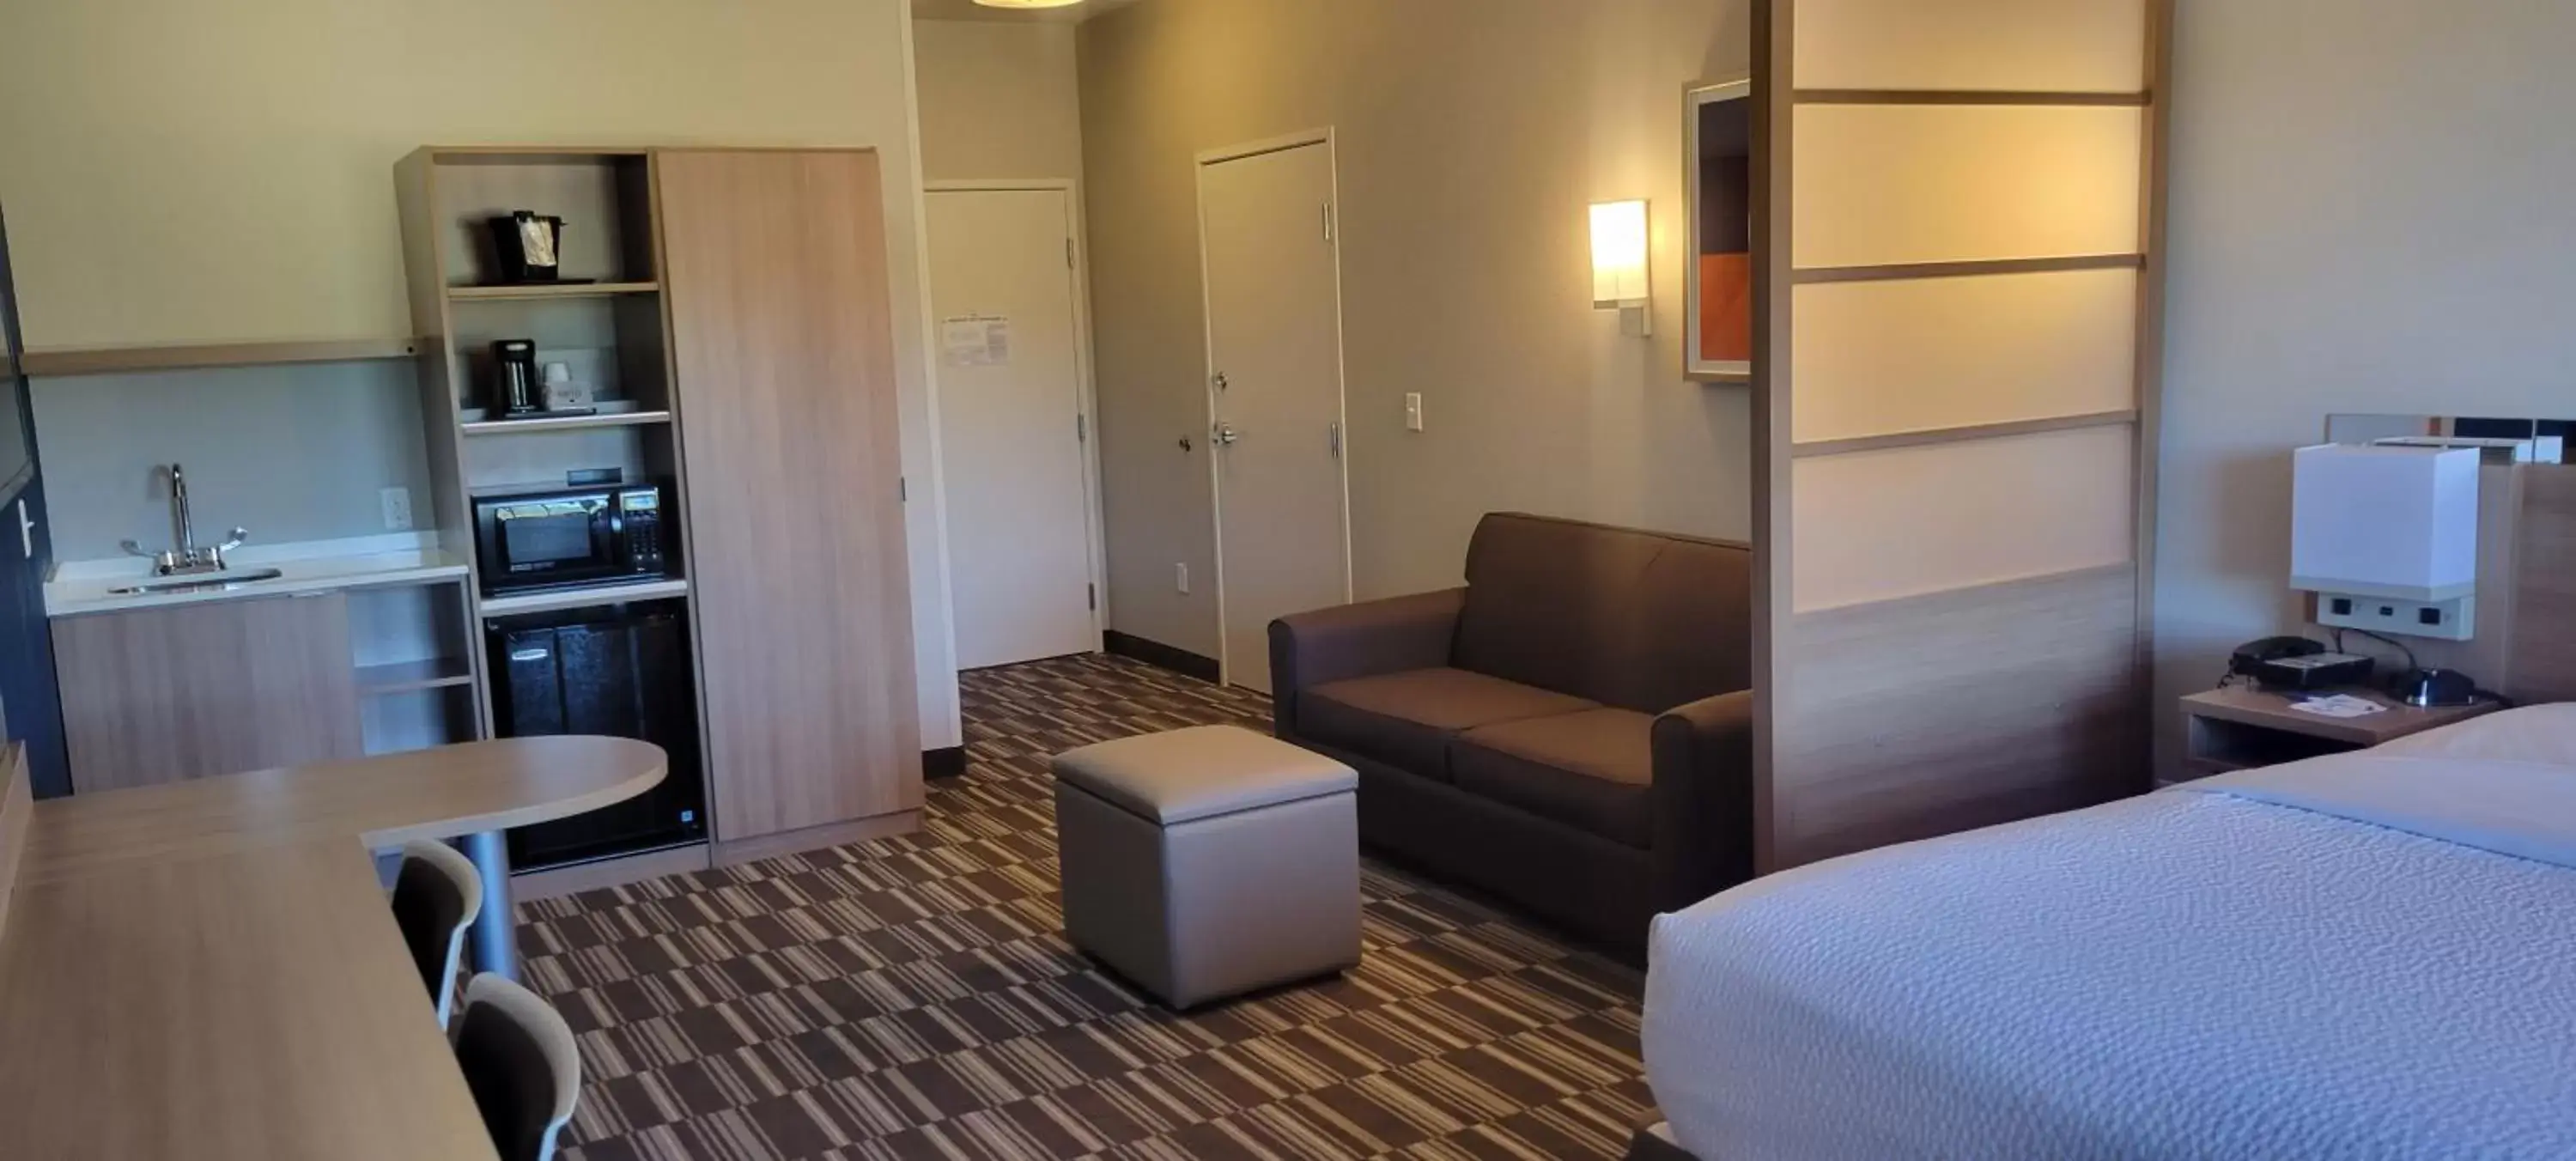 Bedroom, Seating Area in Microtel Inn & Suites by Wyndham Fountain North